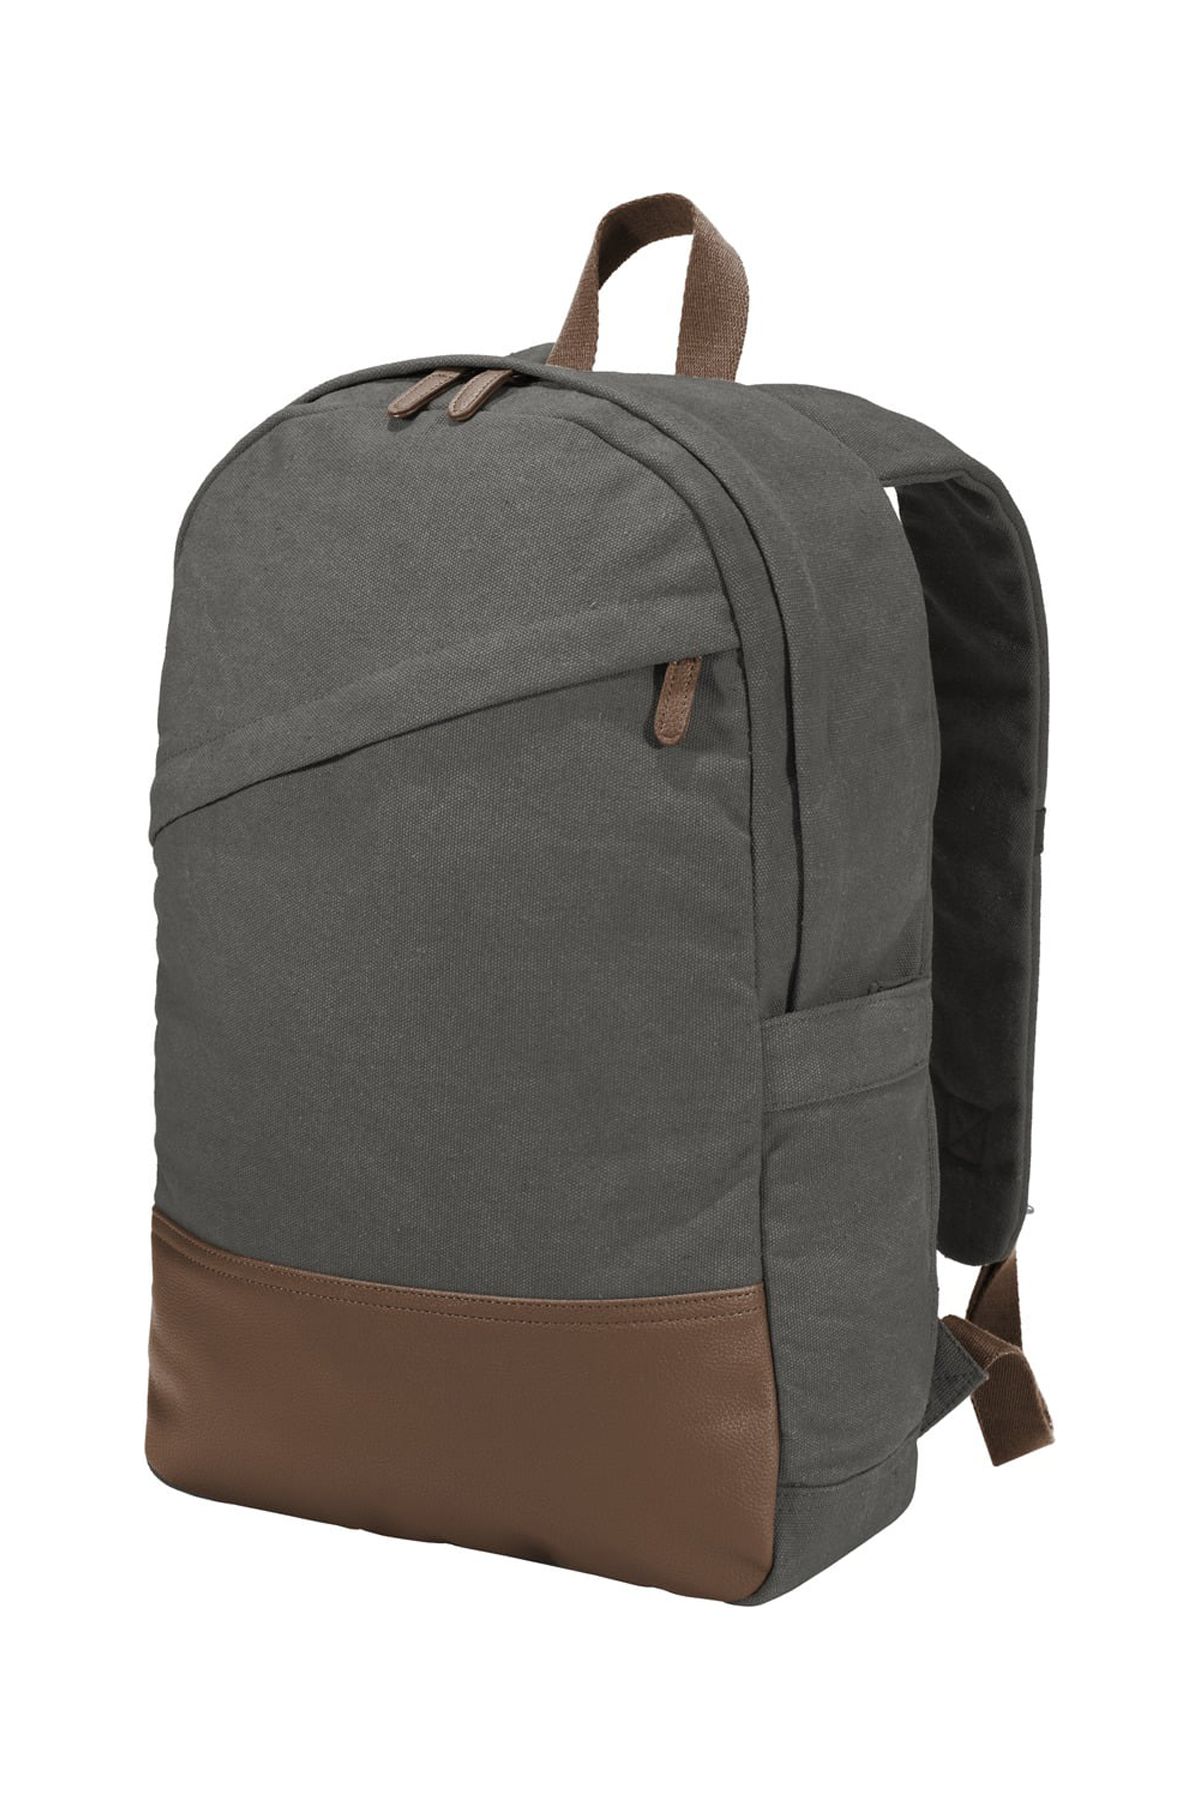 Port Authority Bg210 Cotton Canvas Backpack - image 1 of 3